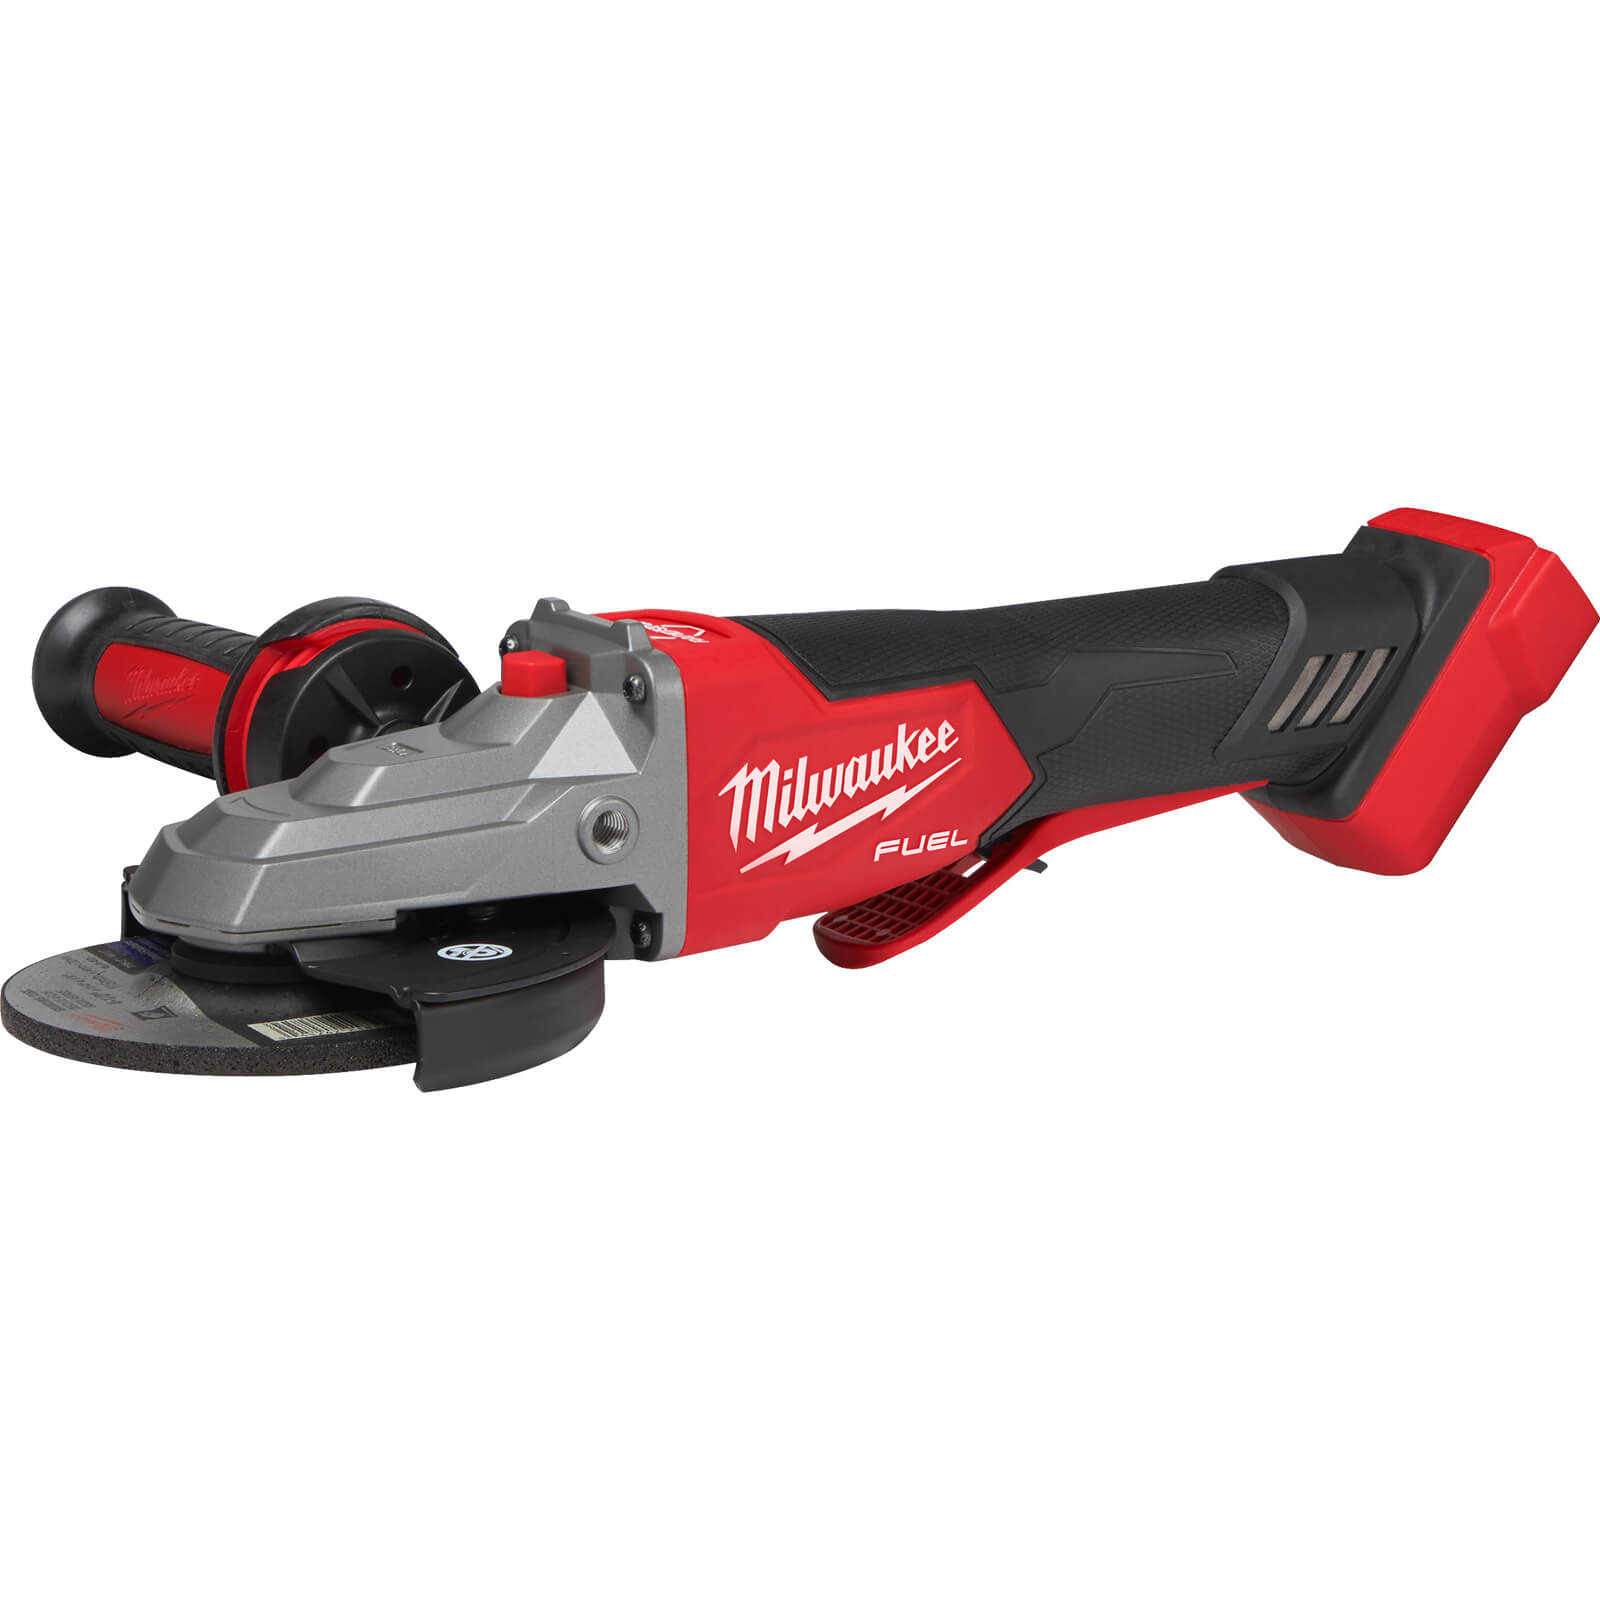 Image of Milwaukee M18 FSAGF125XPDB Fuel 18v Cordless Brushless Angle Grinder 125mm No Batteries No Charger Case